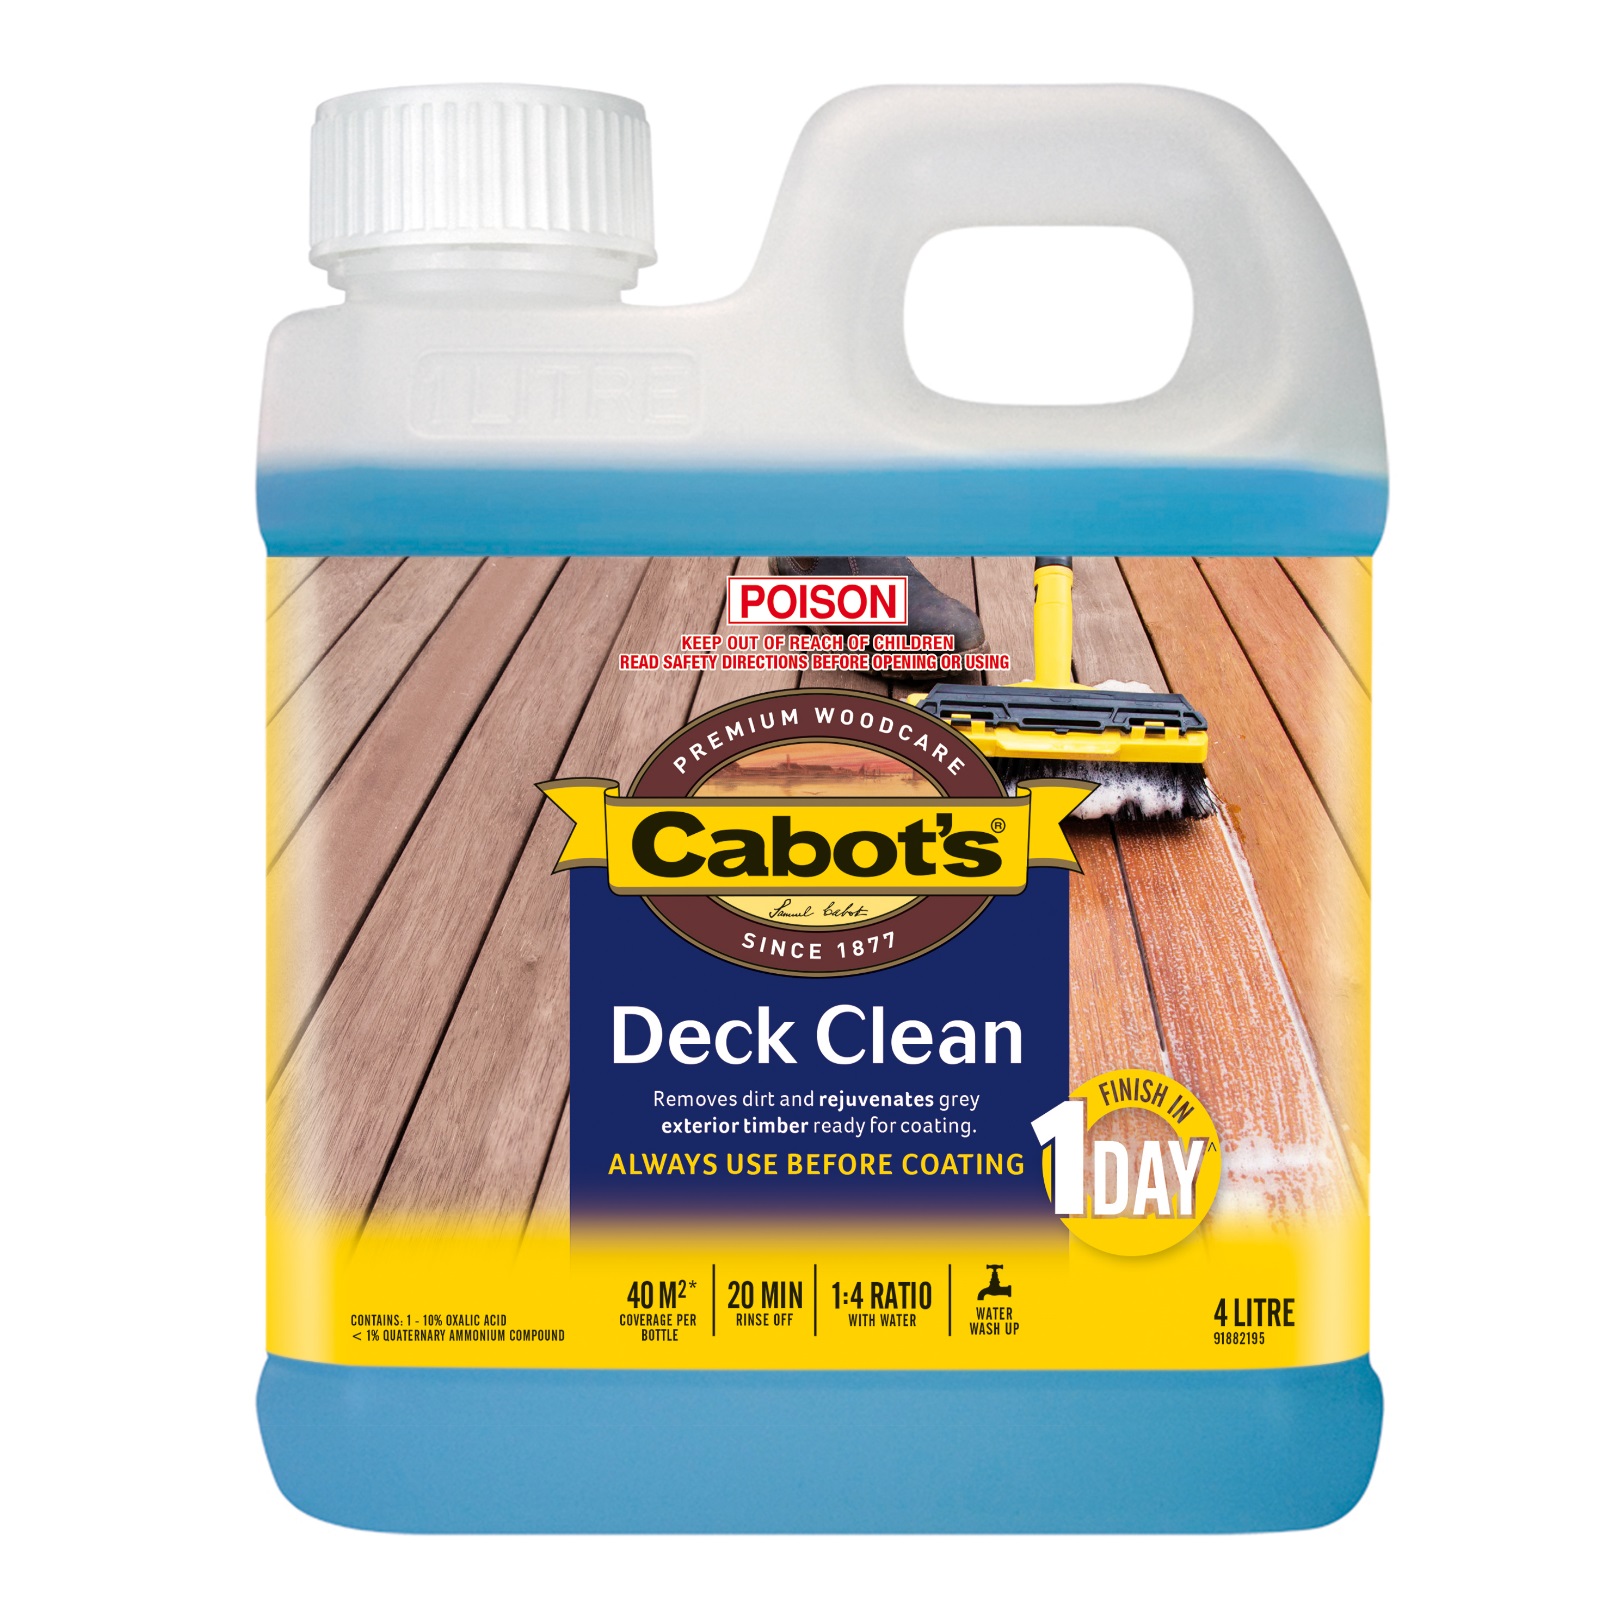 Care & Cleaning of Decking Products